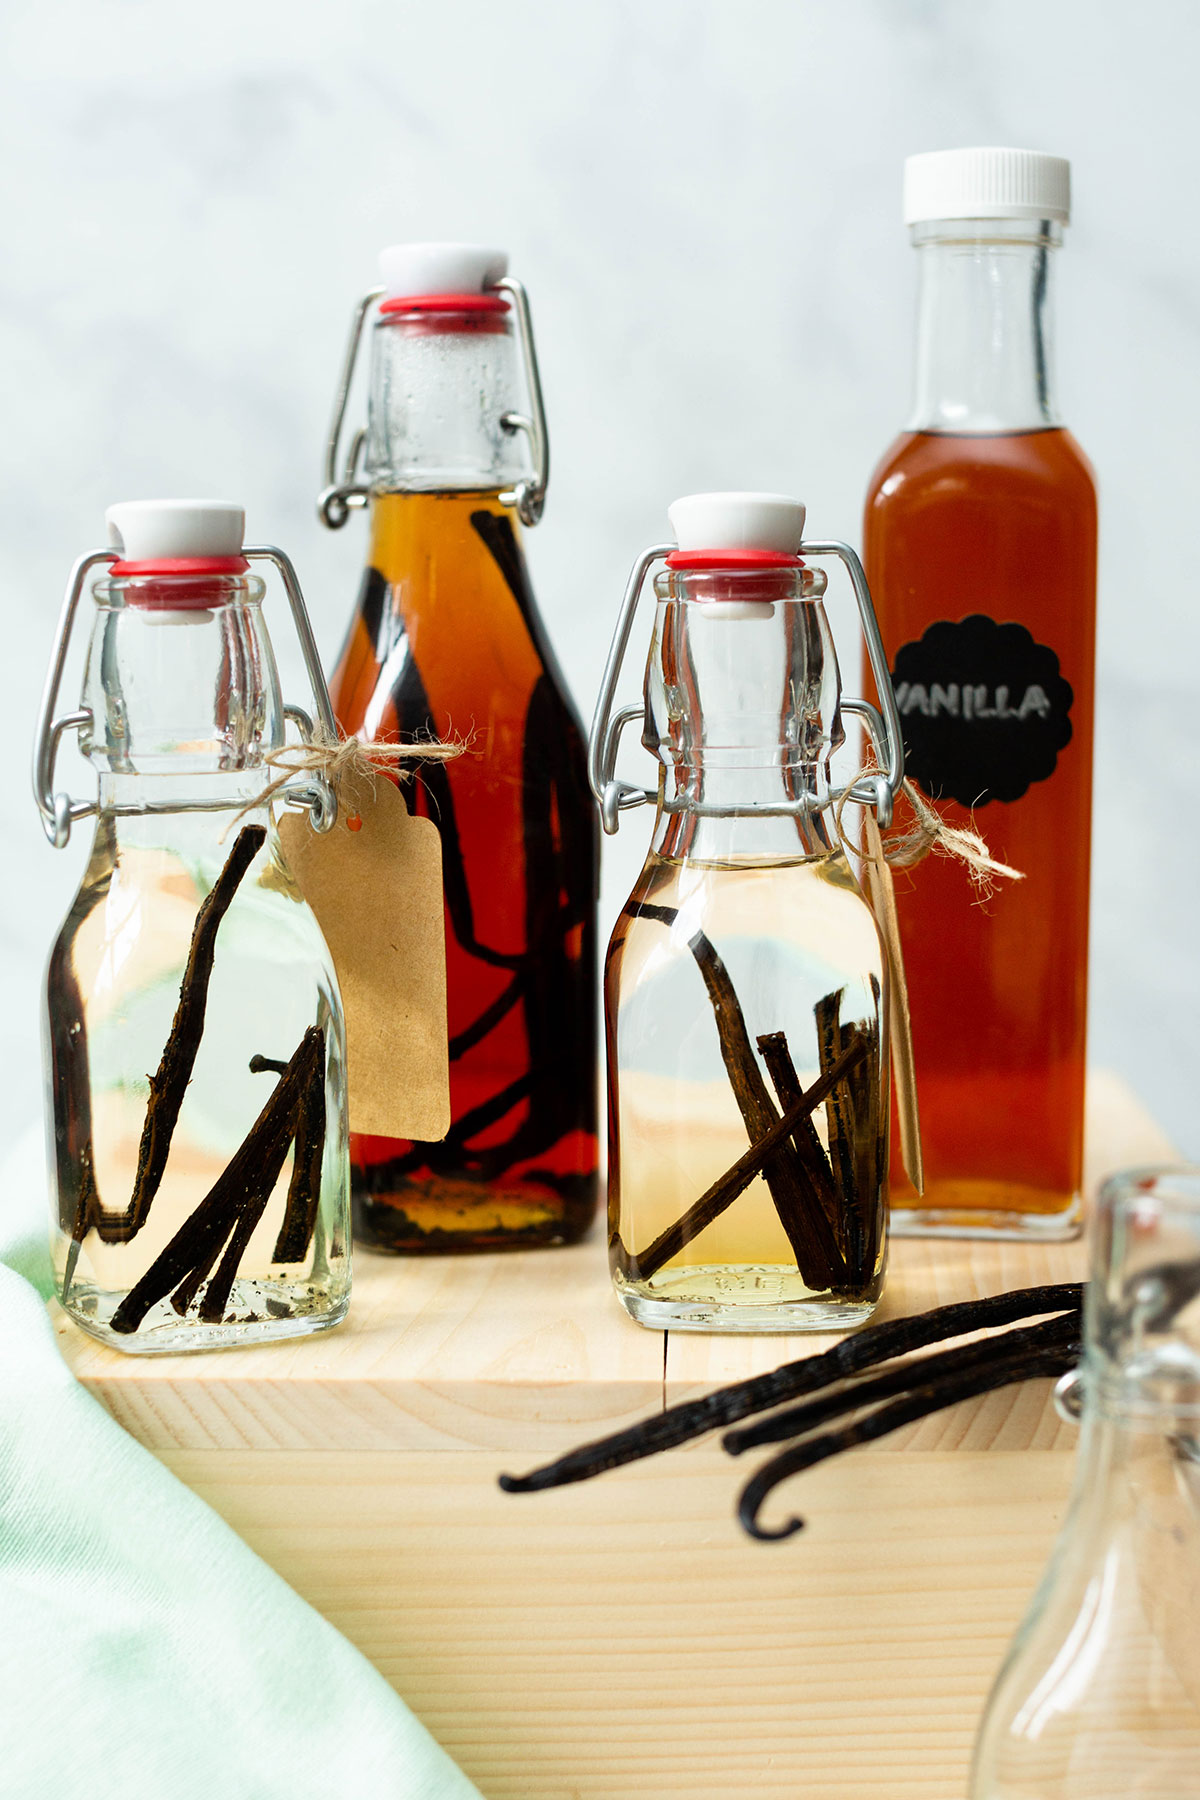 Small and large bottles of vanilla extract that have been aged for varying amounts of time, as well as a few vanilla beans.